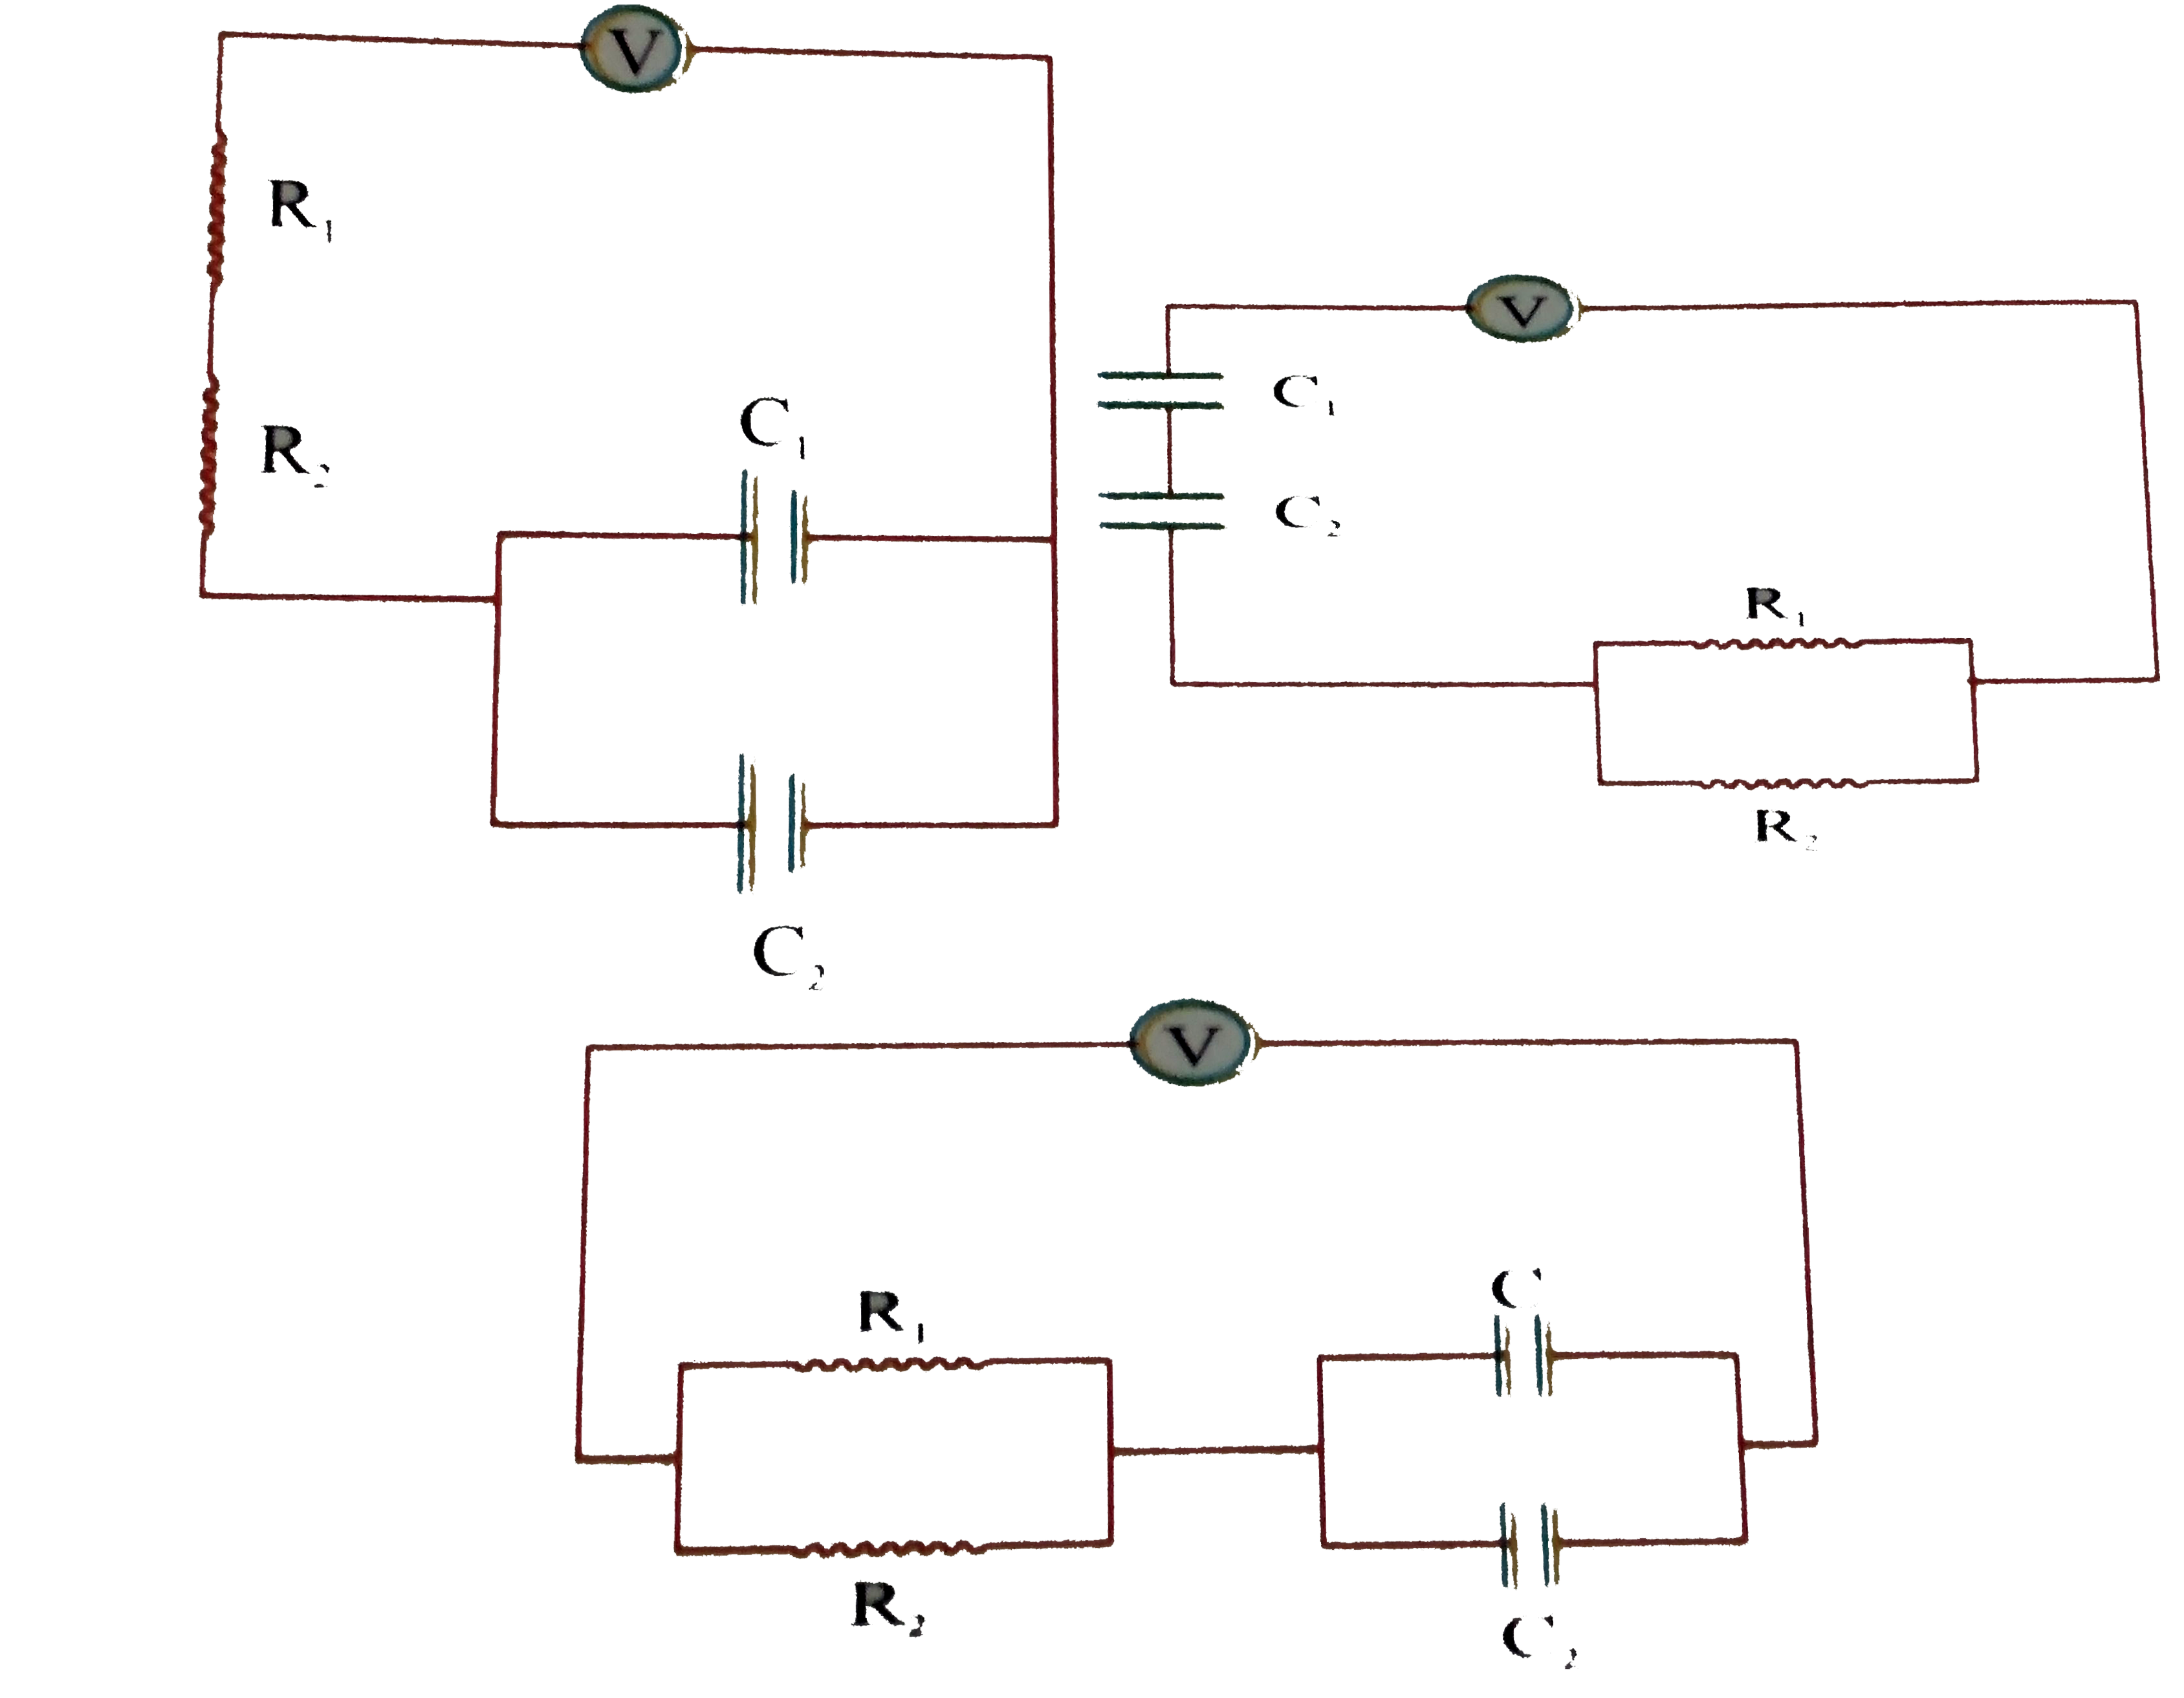 Find the time constant for the given RC circuits in correct order (in mus)   R(1)=1Omega,R(2)=2Omega,C(1)=4muF,C(2)=2muF